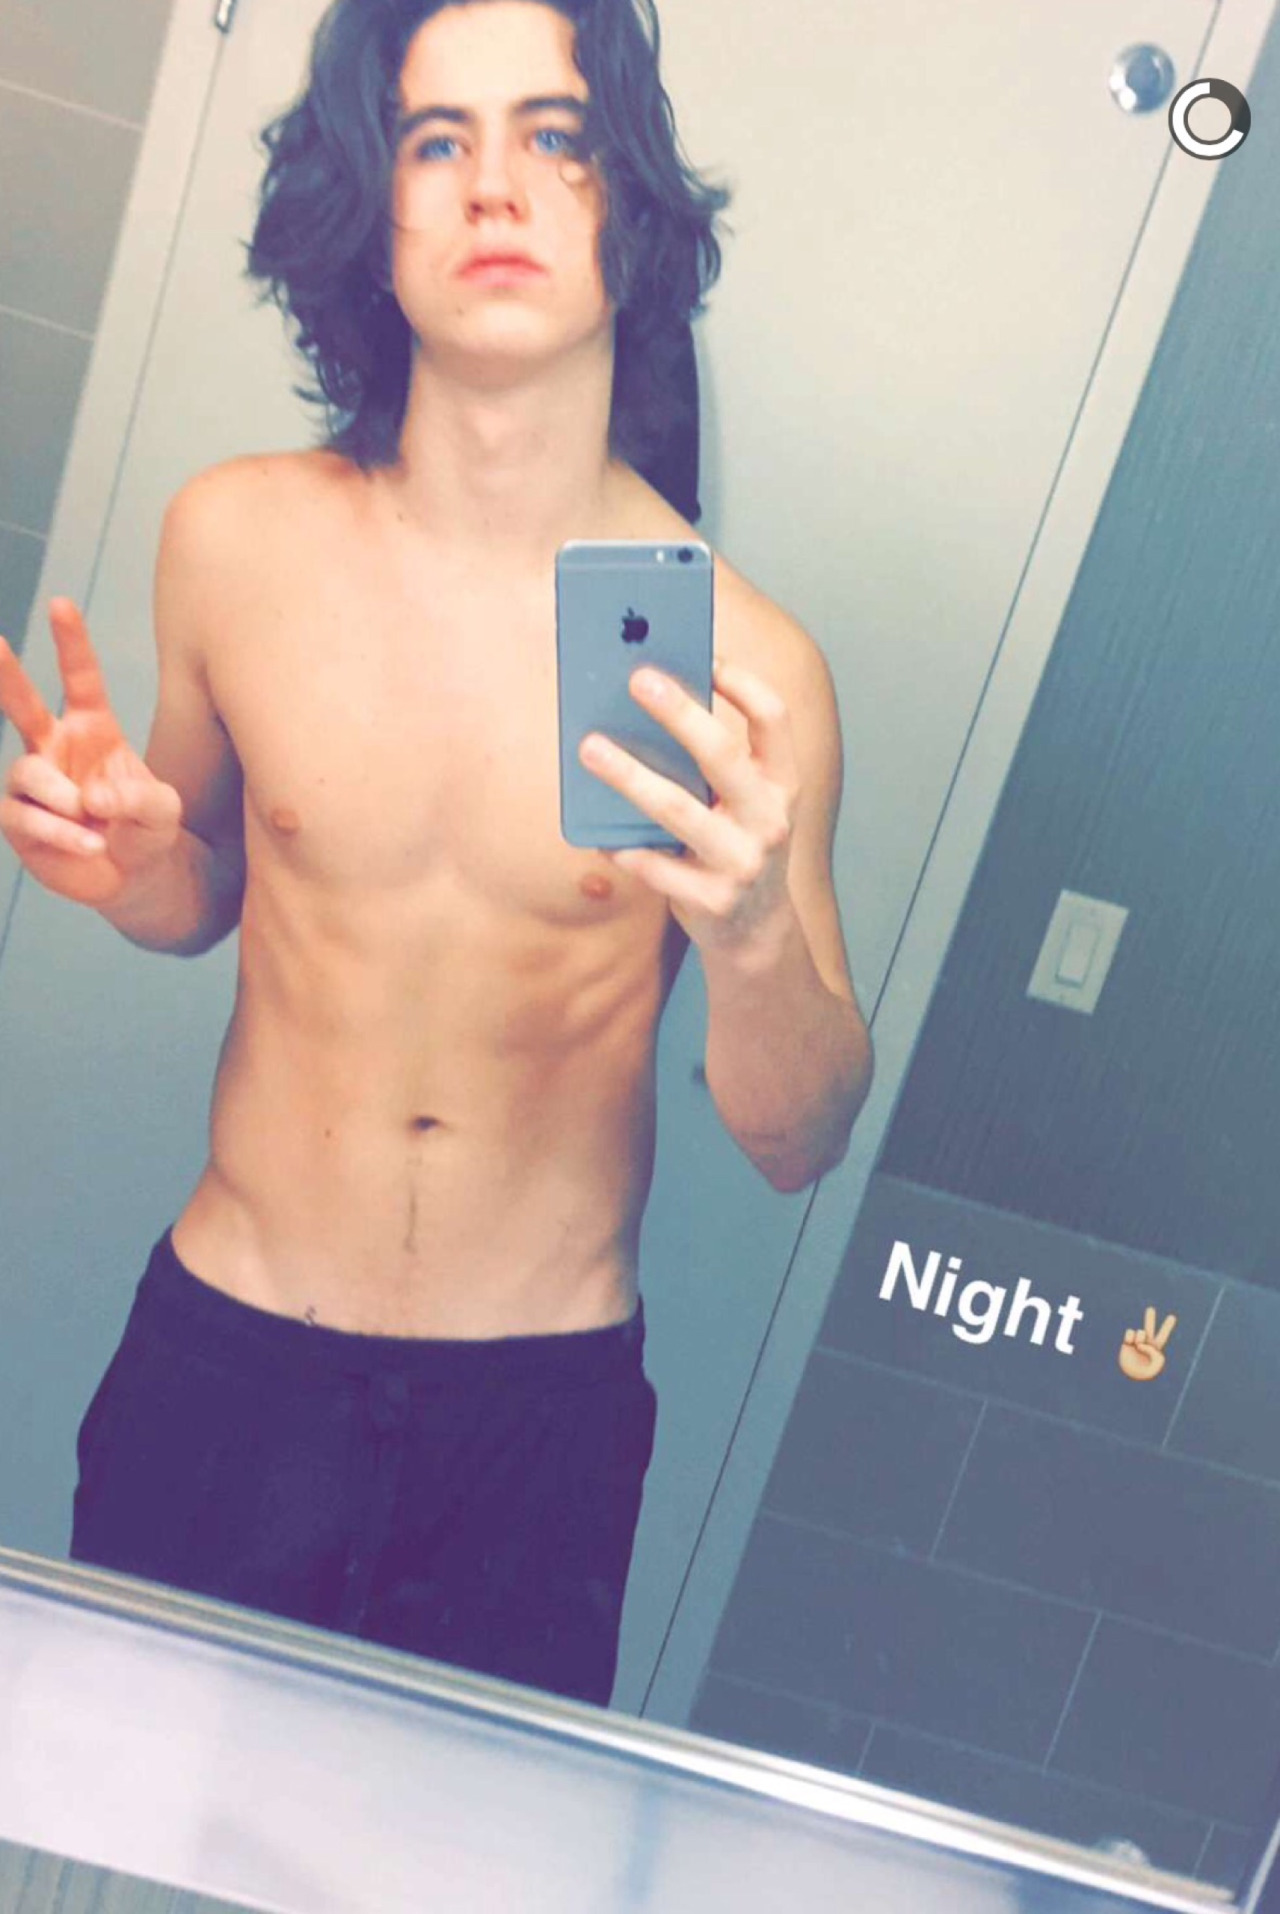 Archive Dongs No Anything On Nash Grier Male General